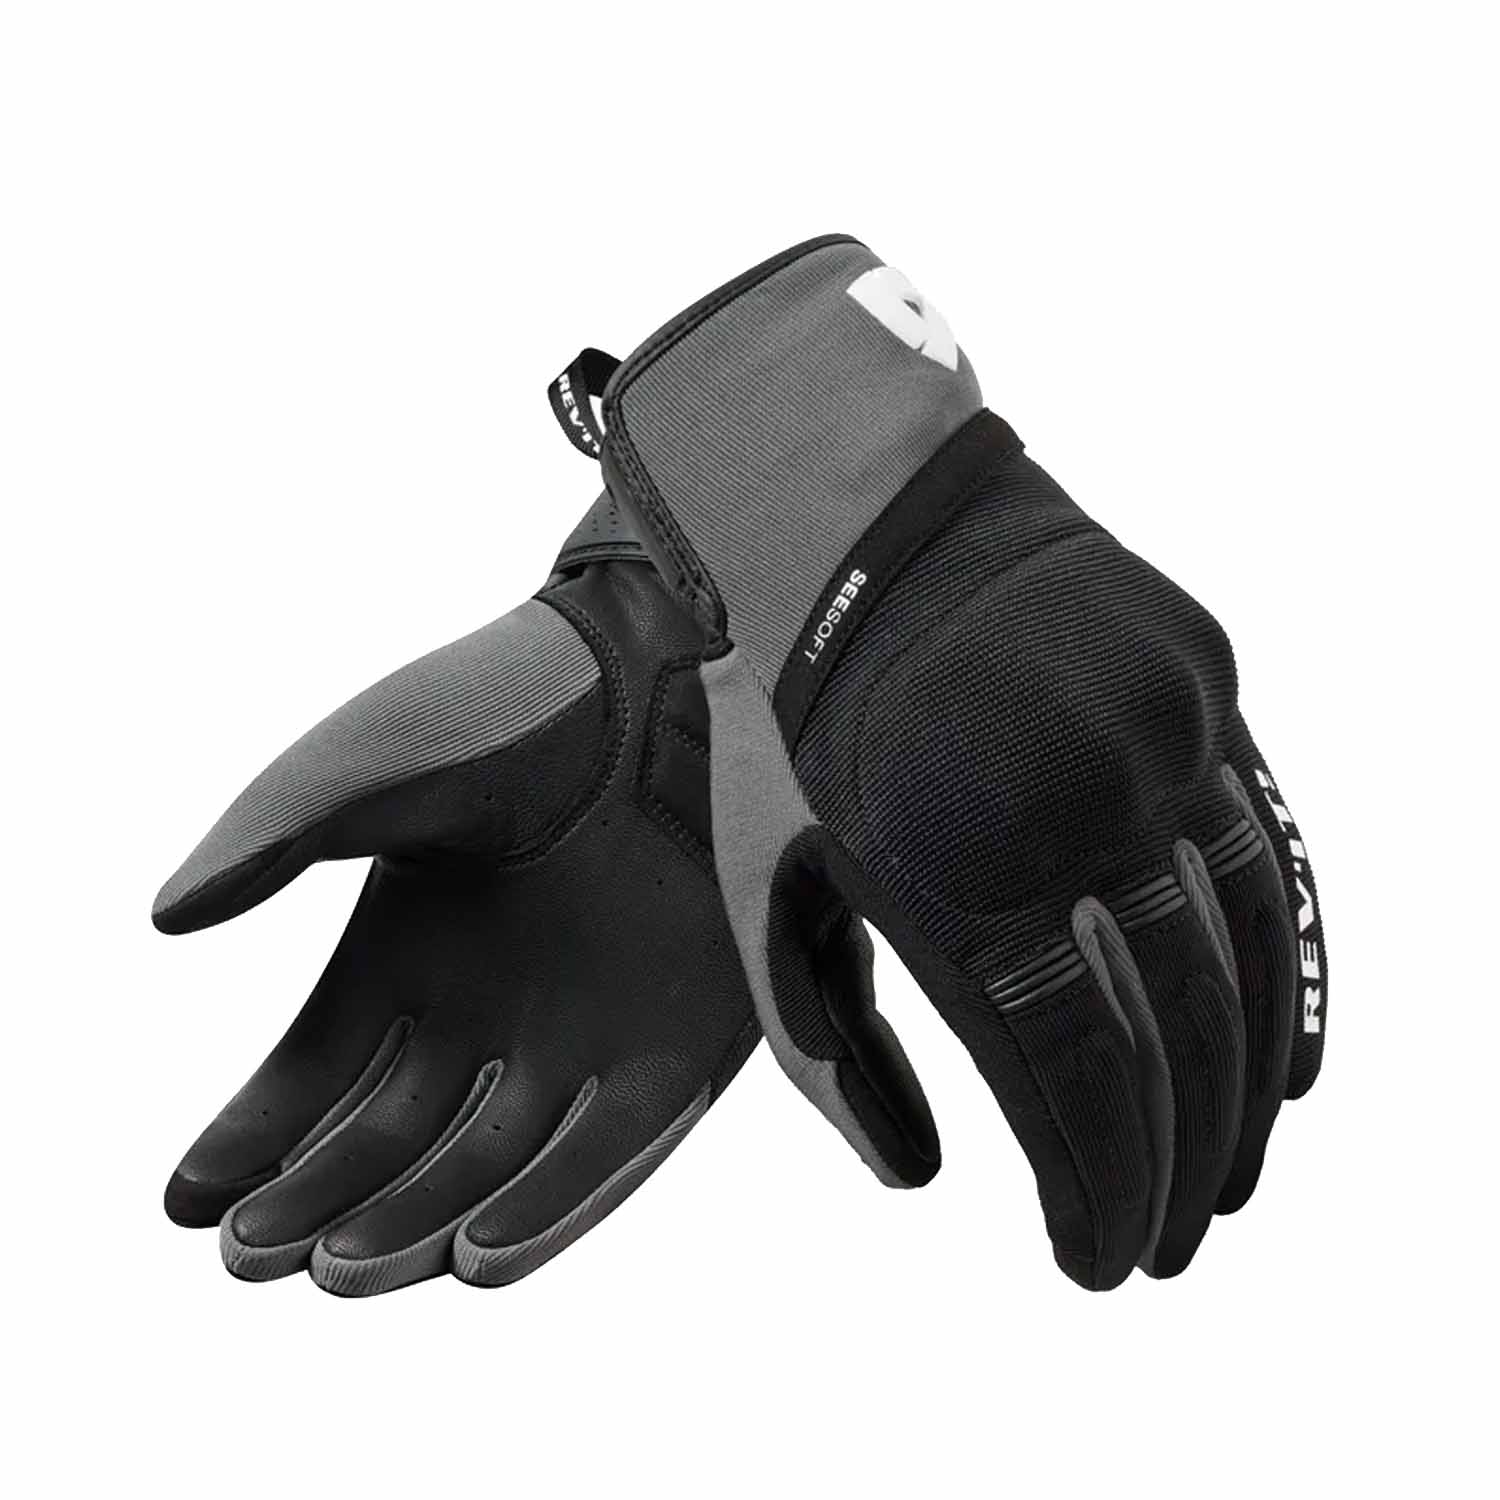 Image of EU REV'IT! Mosca 2 Gloves Black Grey Taille 2XL